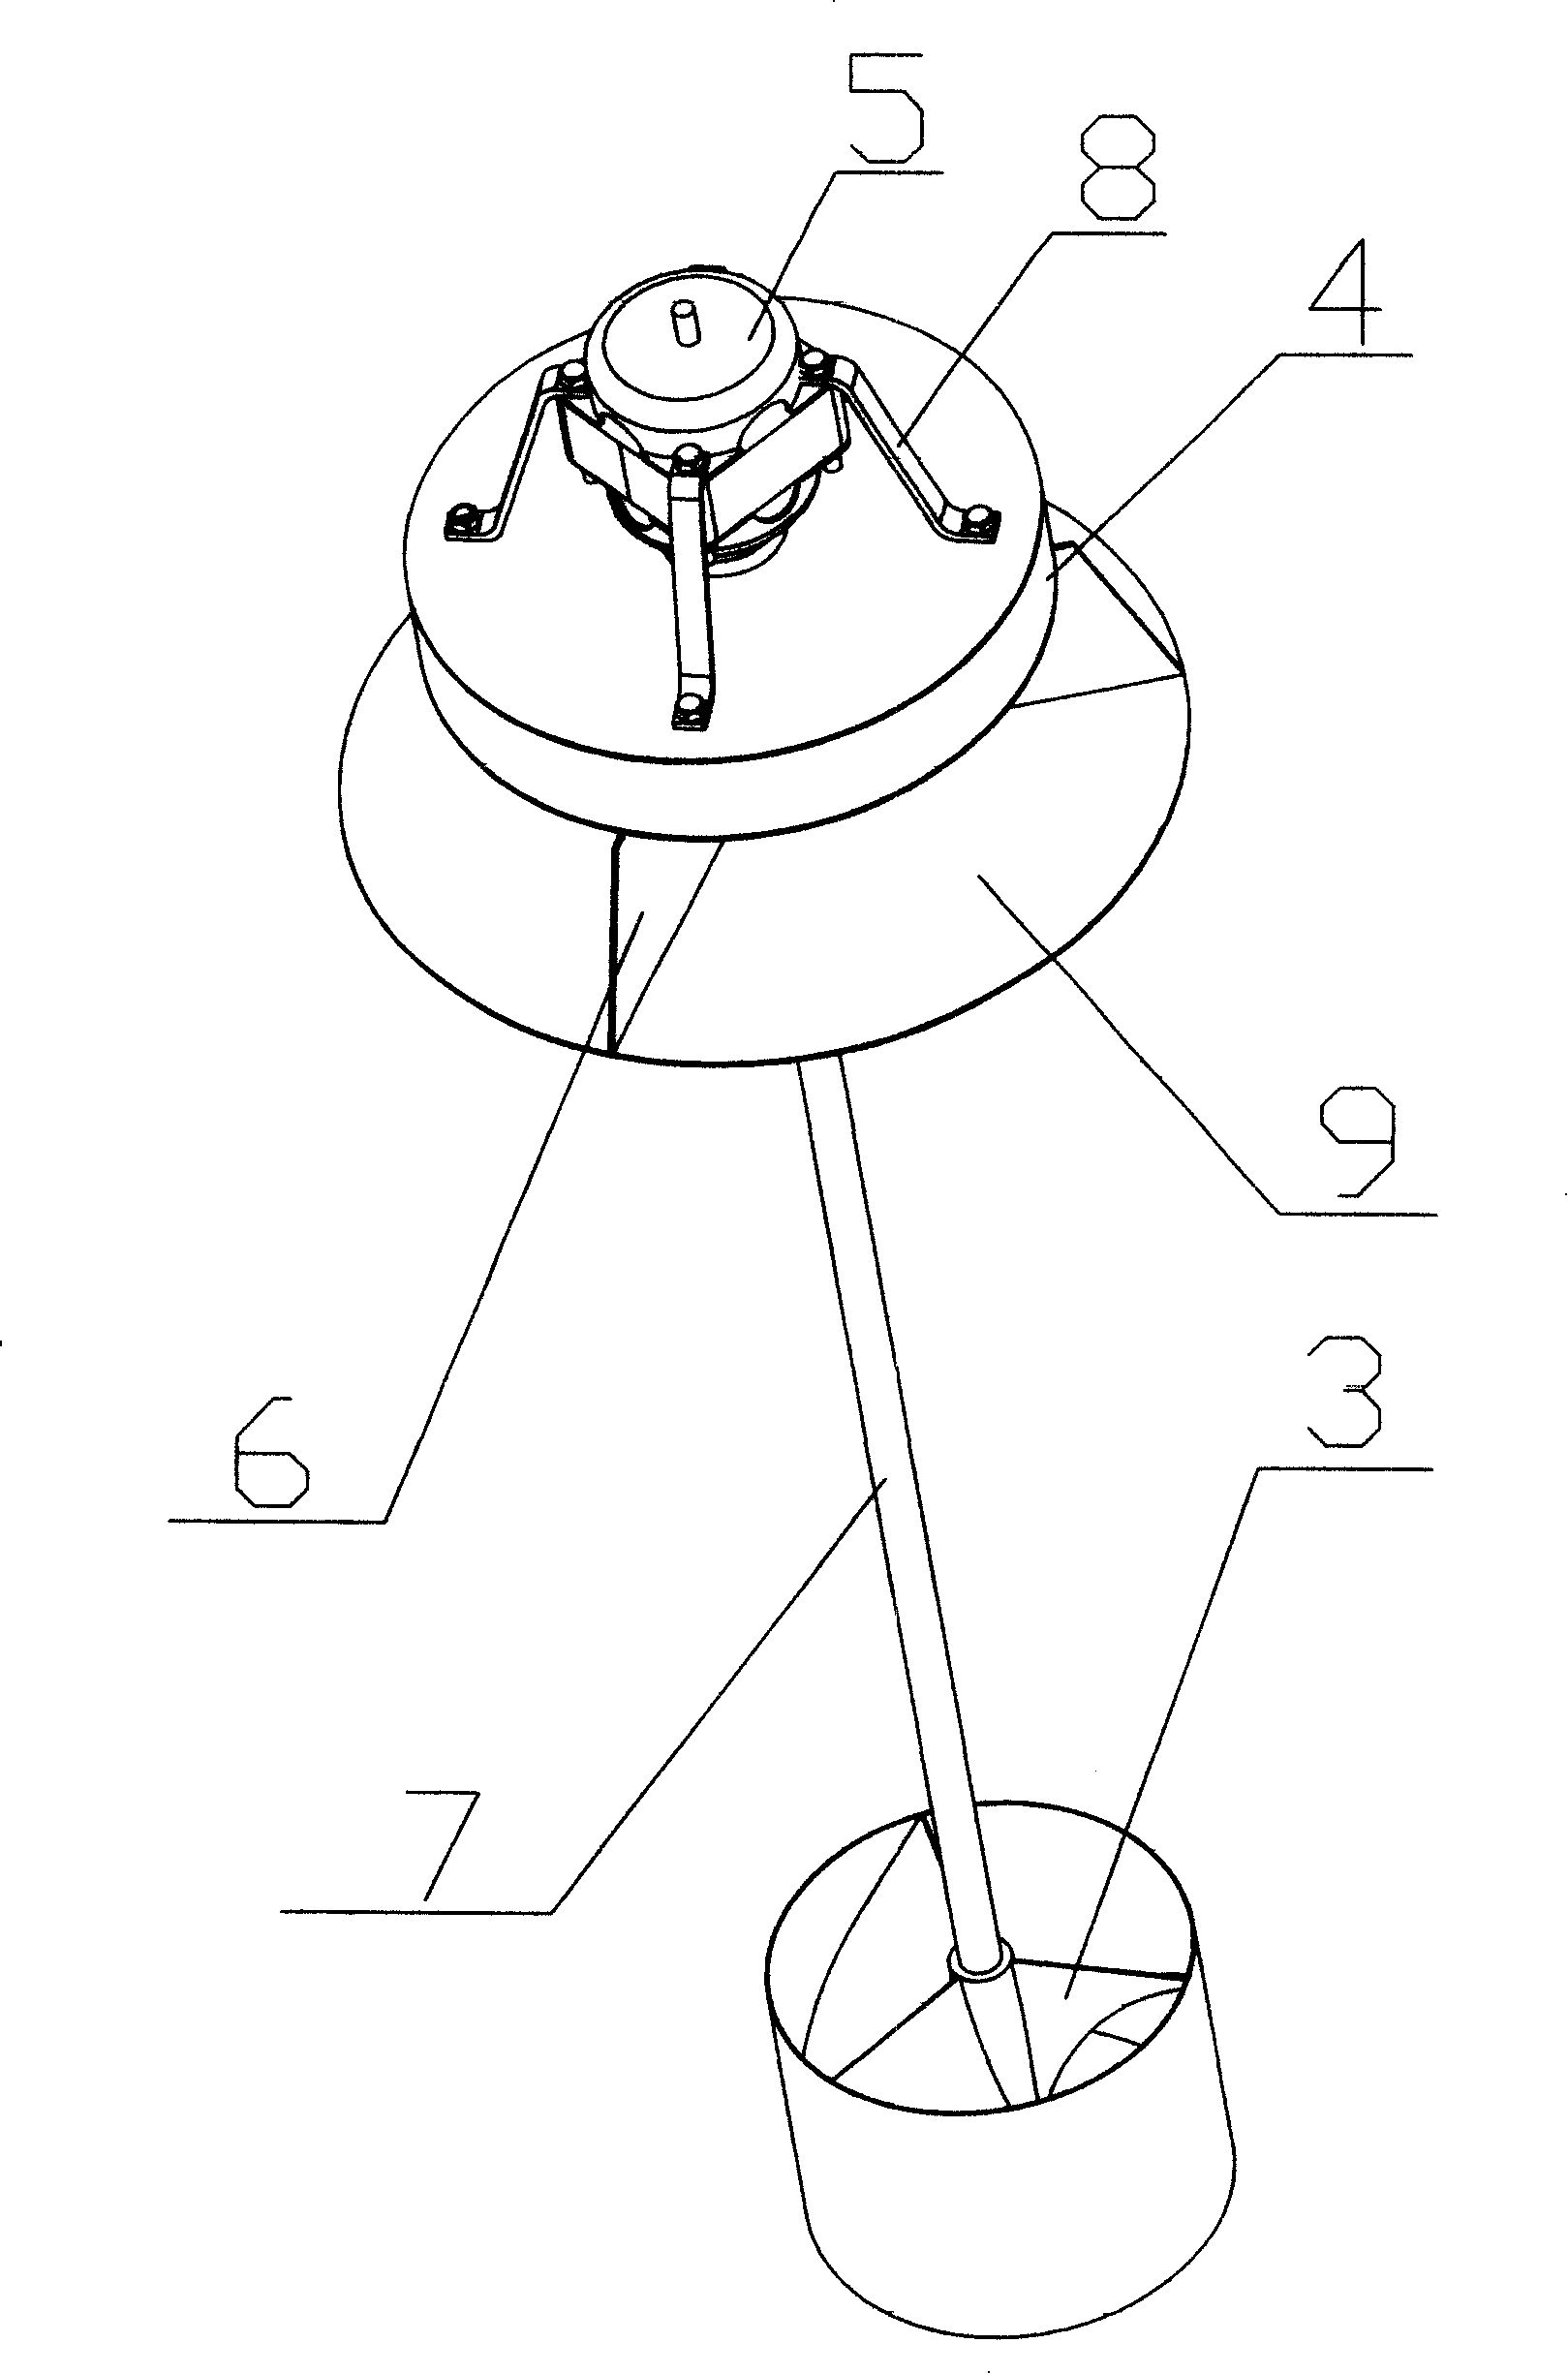 Method and apparatus for generating power using ocean wave energy